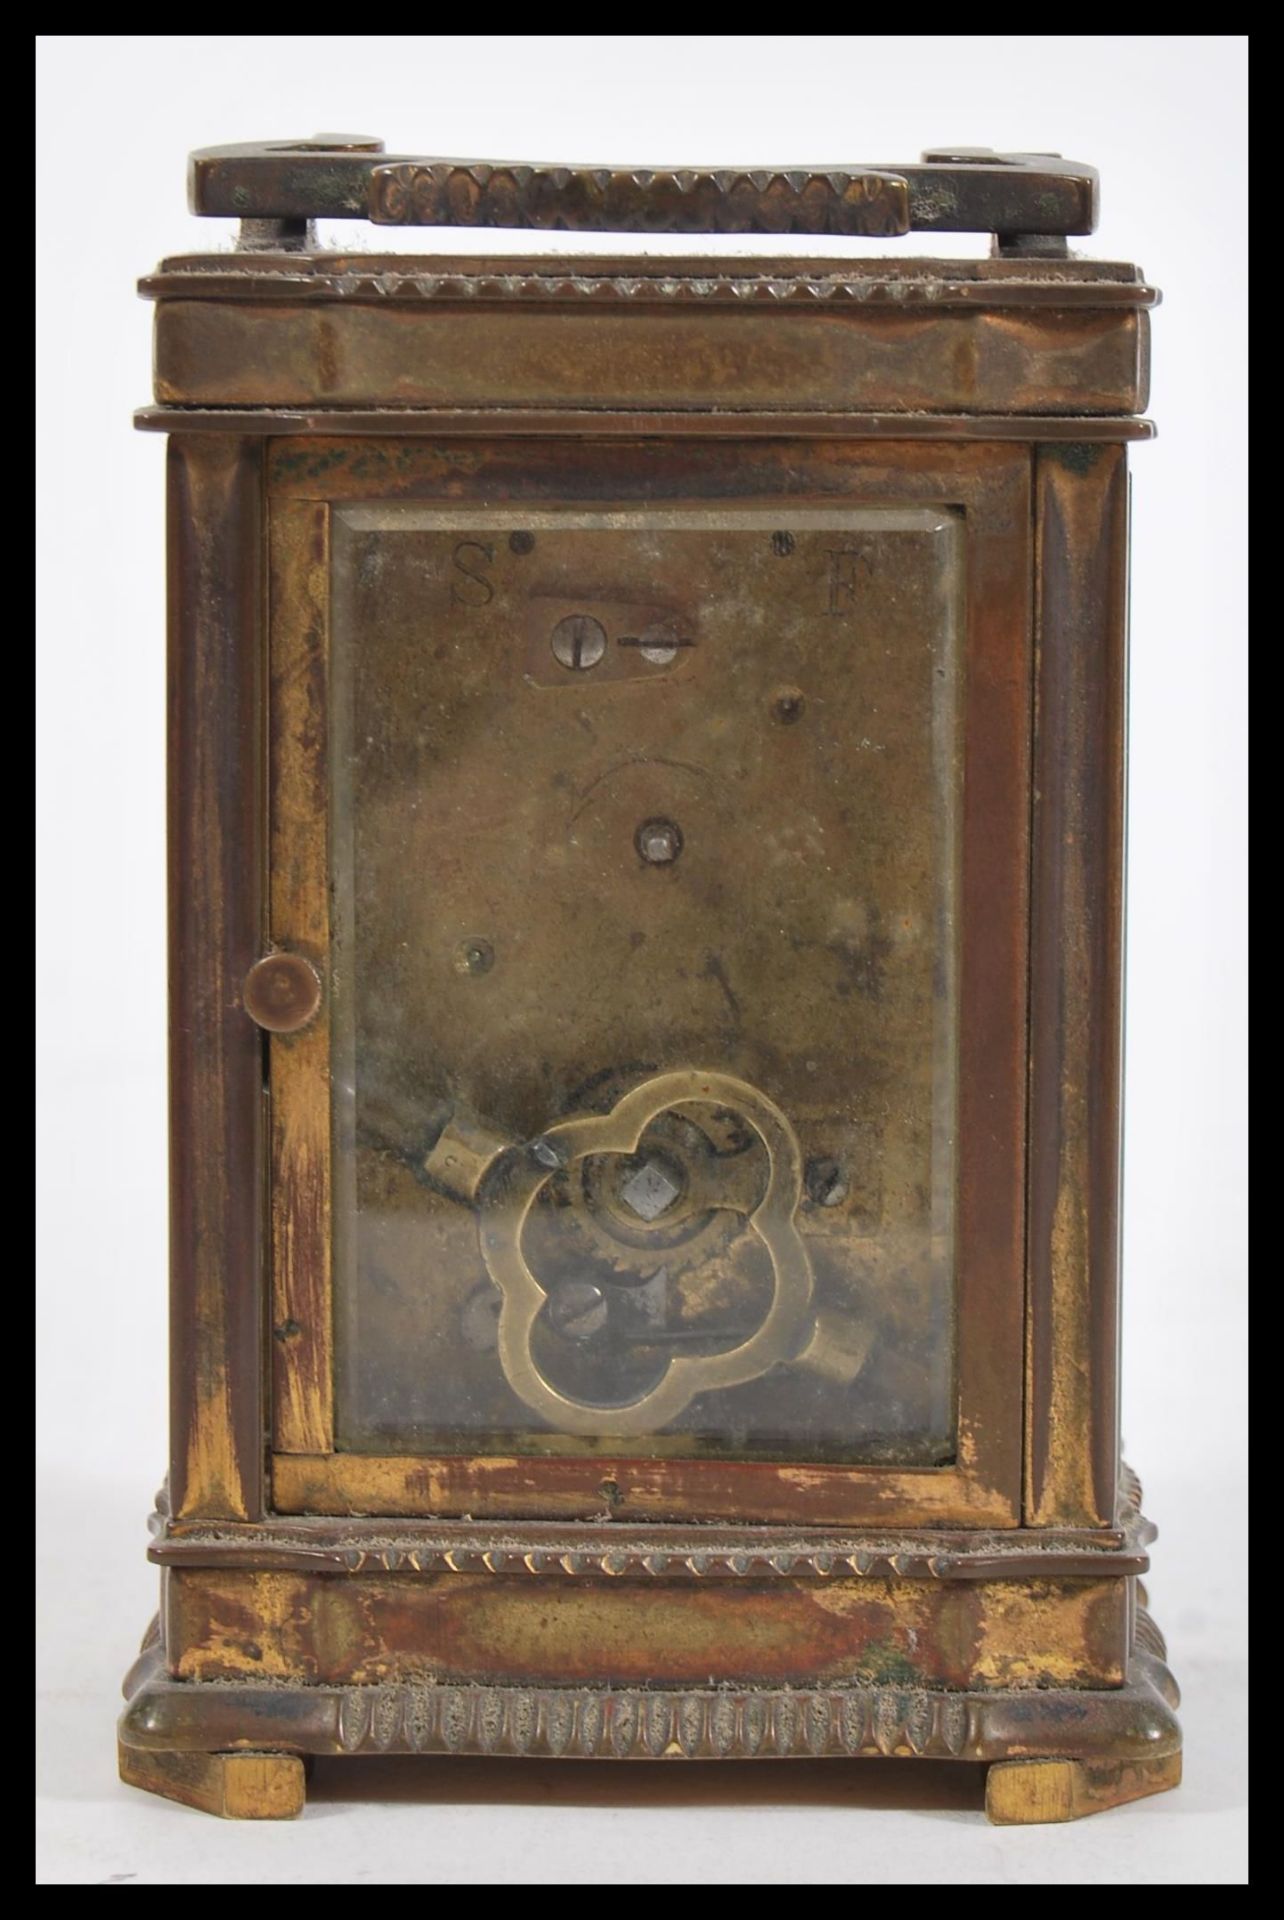 A 19th Century French brass carriage clock having a Roman numeral chapter ring with swing handle - Image 4 of 5